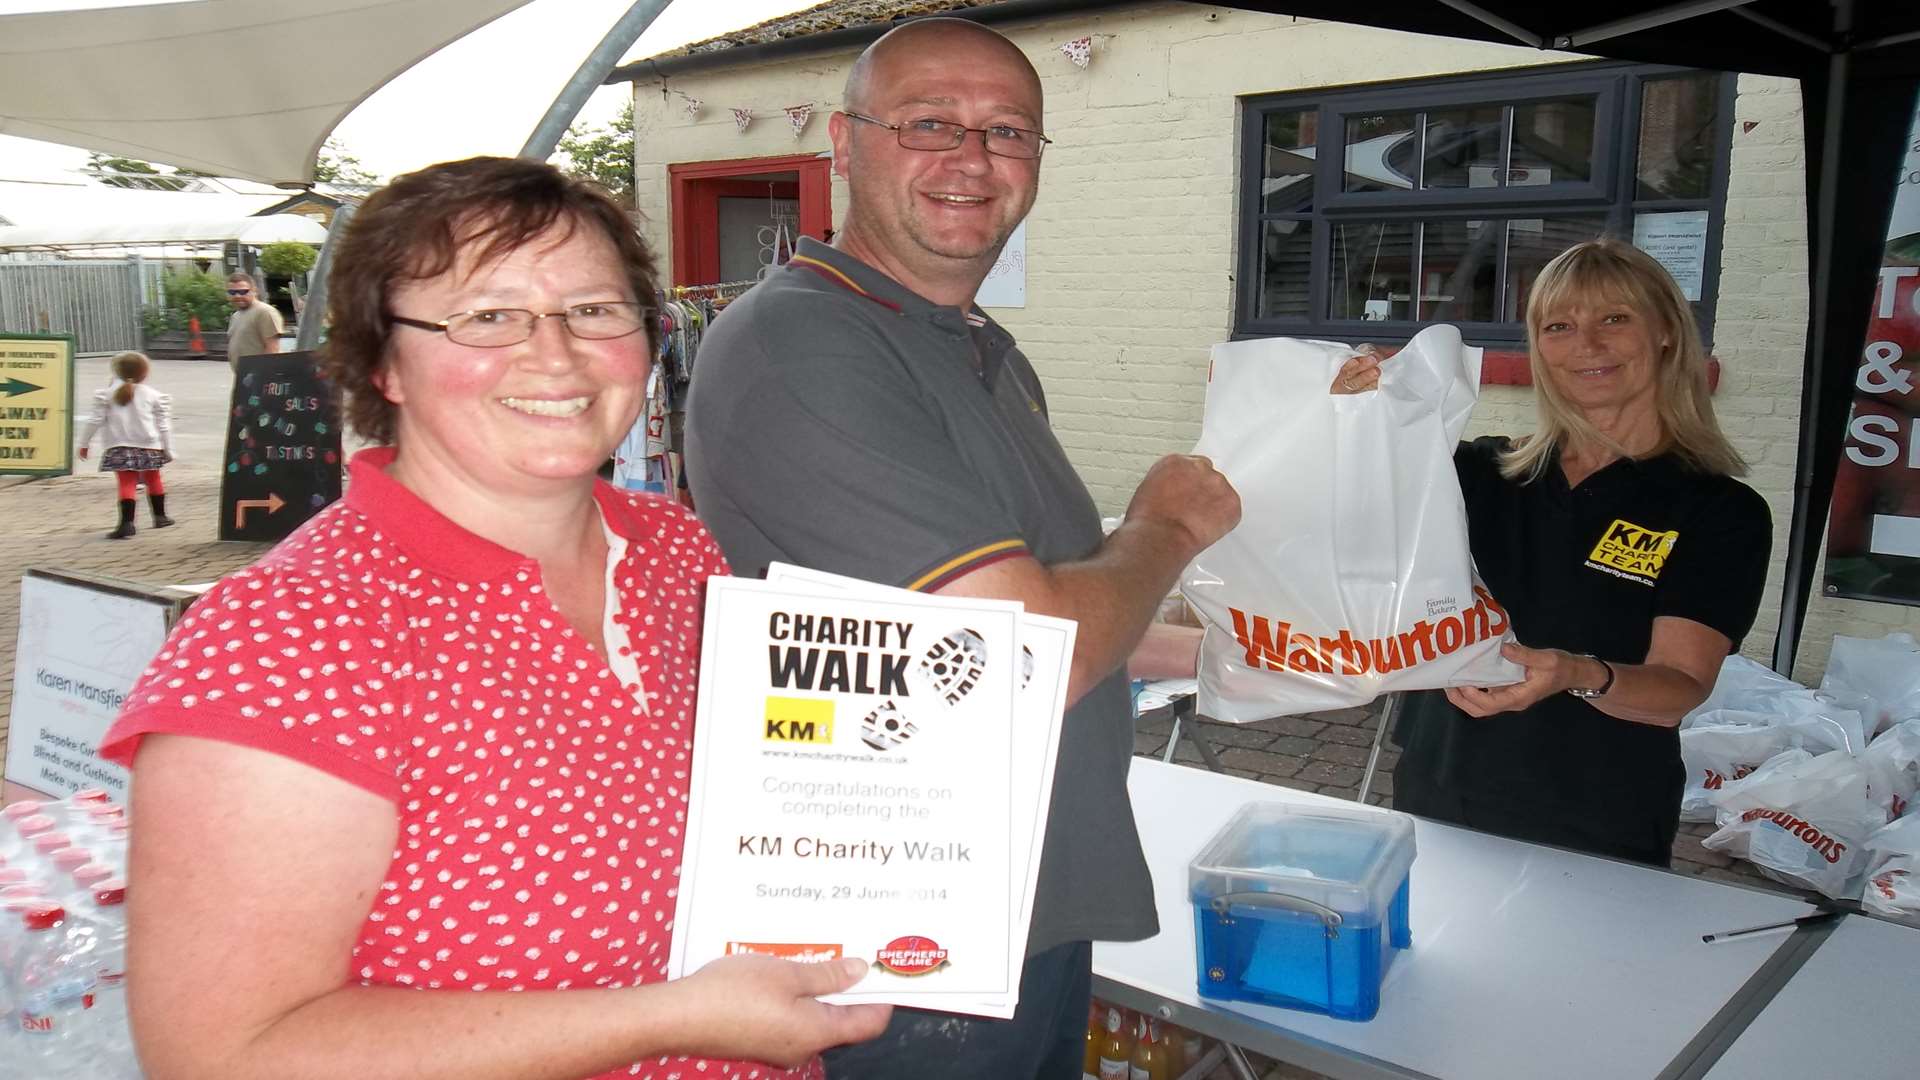 The KM Charity Team arranges everything for fundraising events such as the KM Charity Walk - including certificates and goody bags! - all you need to do is join in the fun.